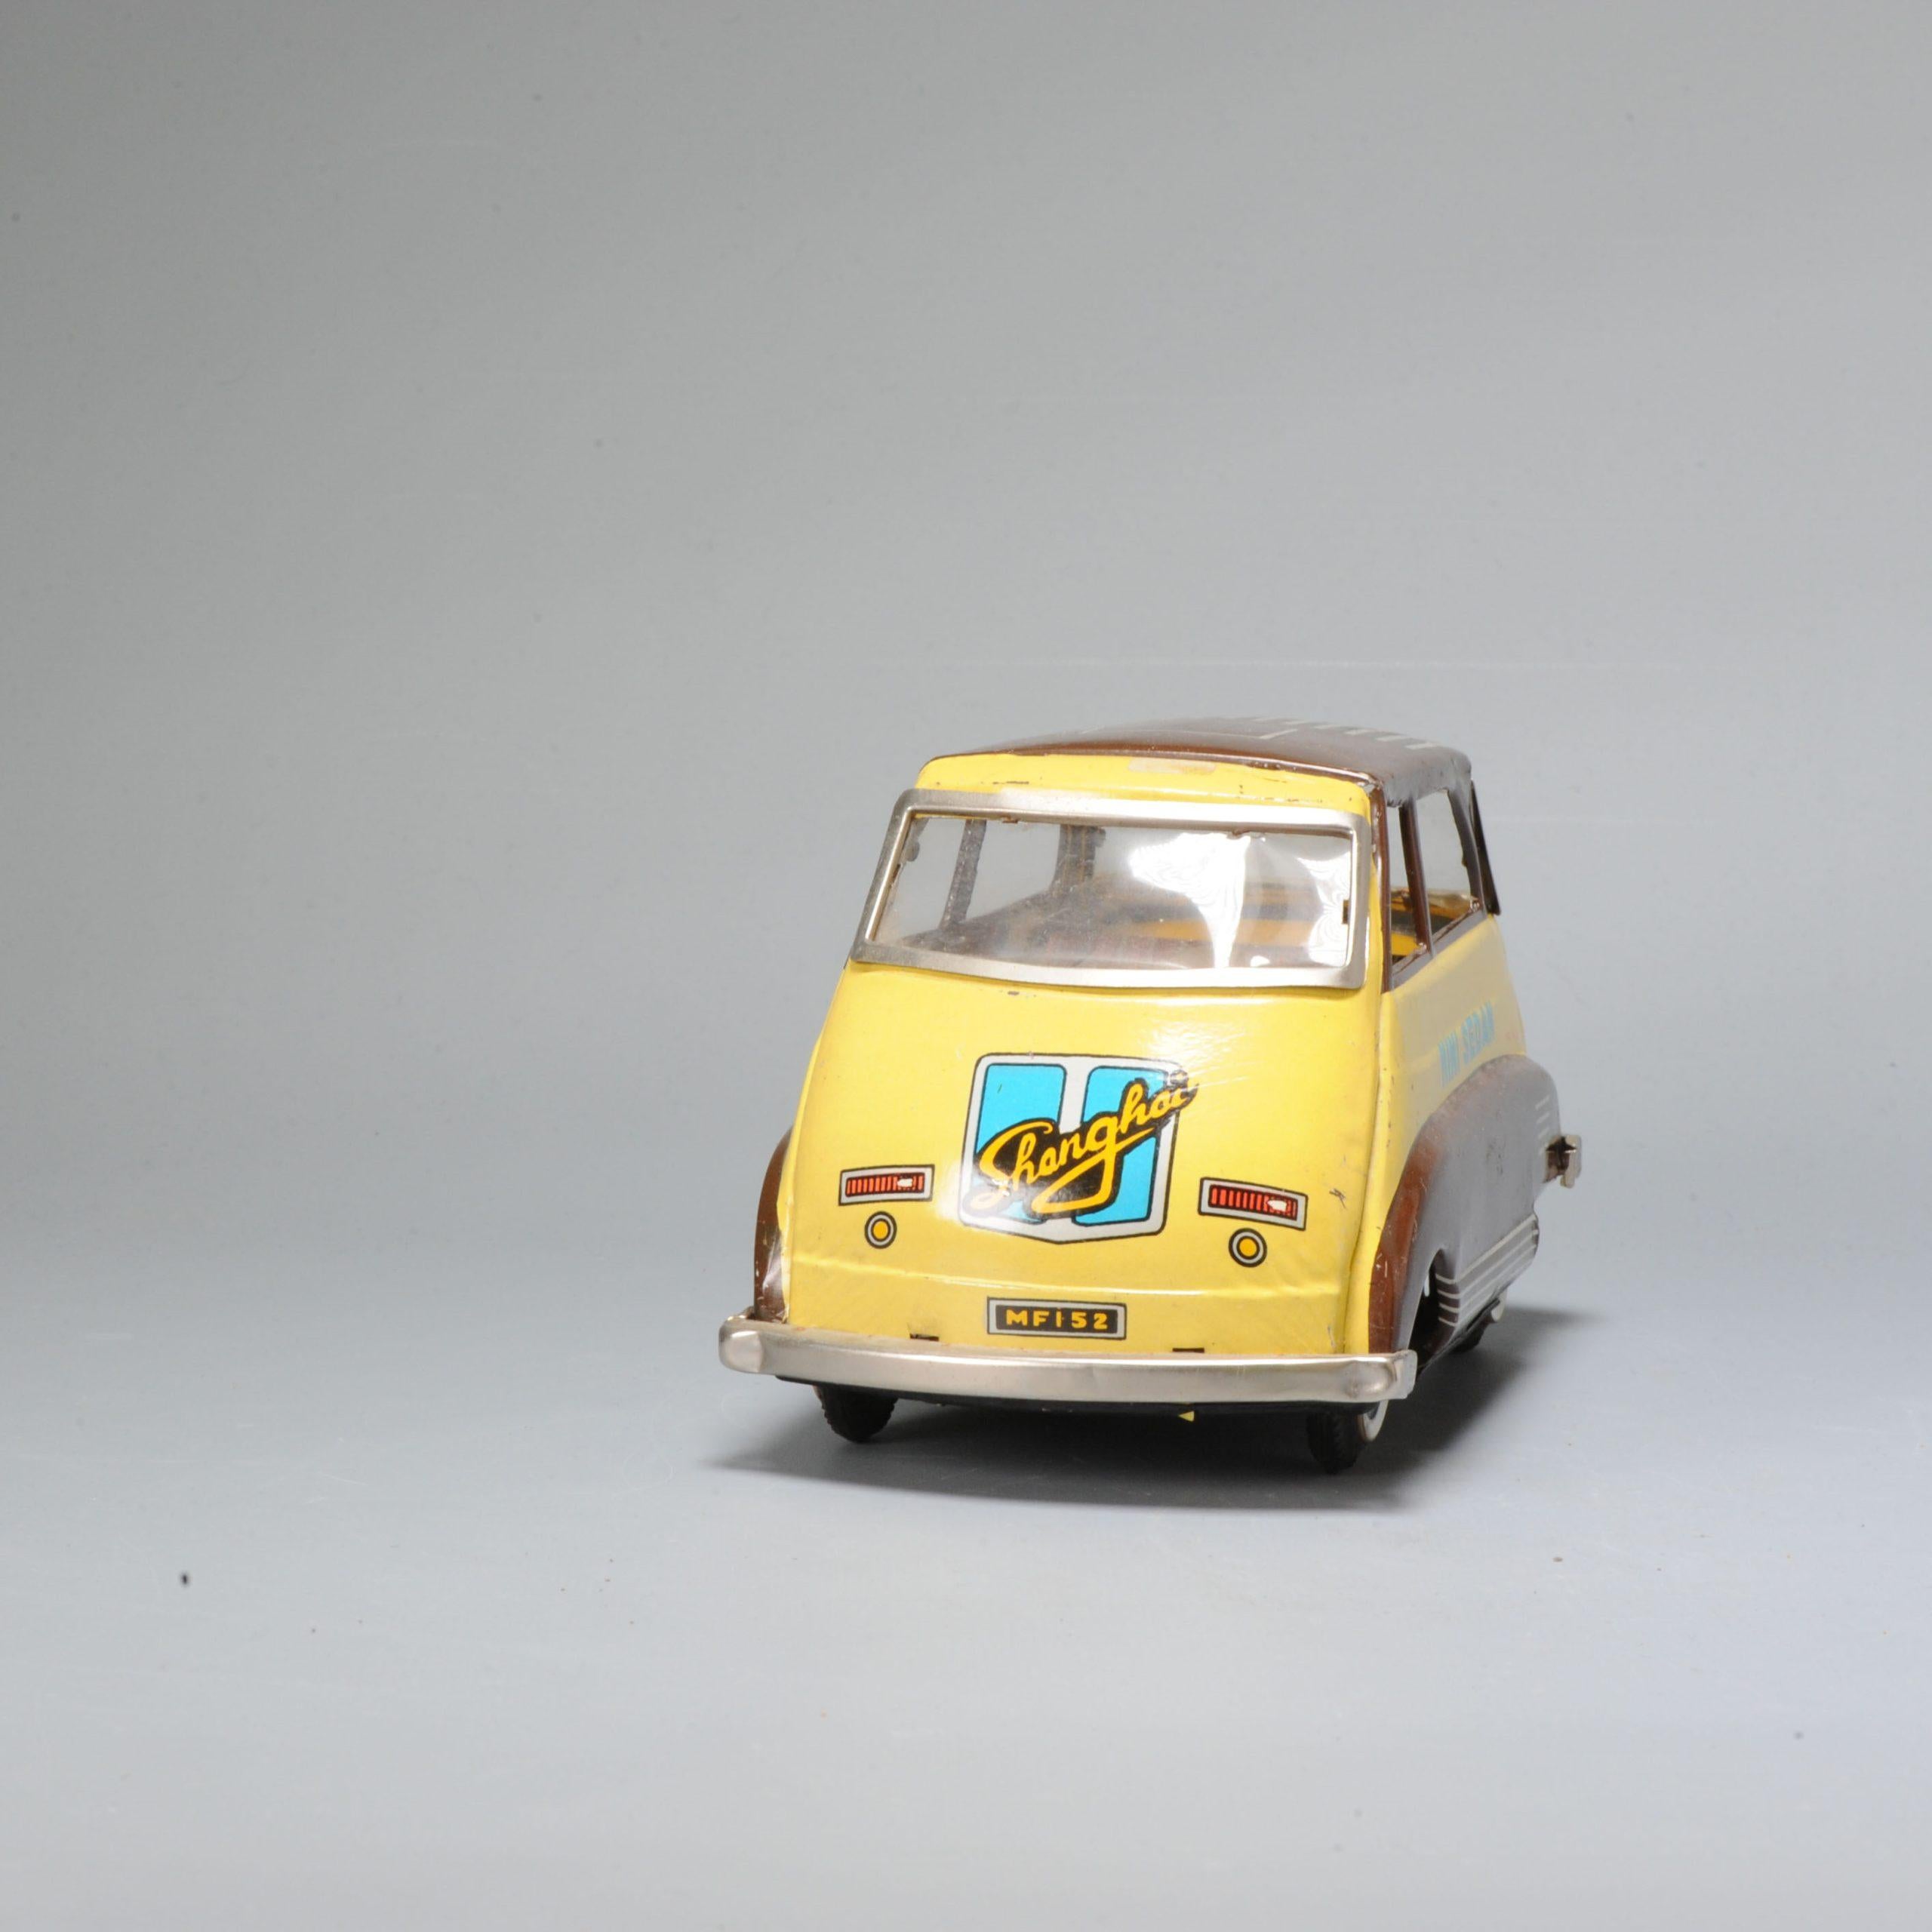 One of the absolute rarest antique Chinese toys made. This is a most unusually made antique toy from the 1950/1960s . A Mini sedan Shanghai car with the nr MF 152

Additional information:
Material: Porcelain & Pottery
Region of Origin: